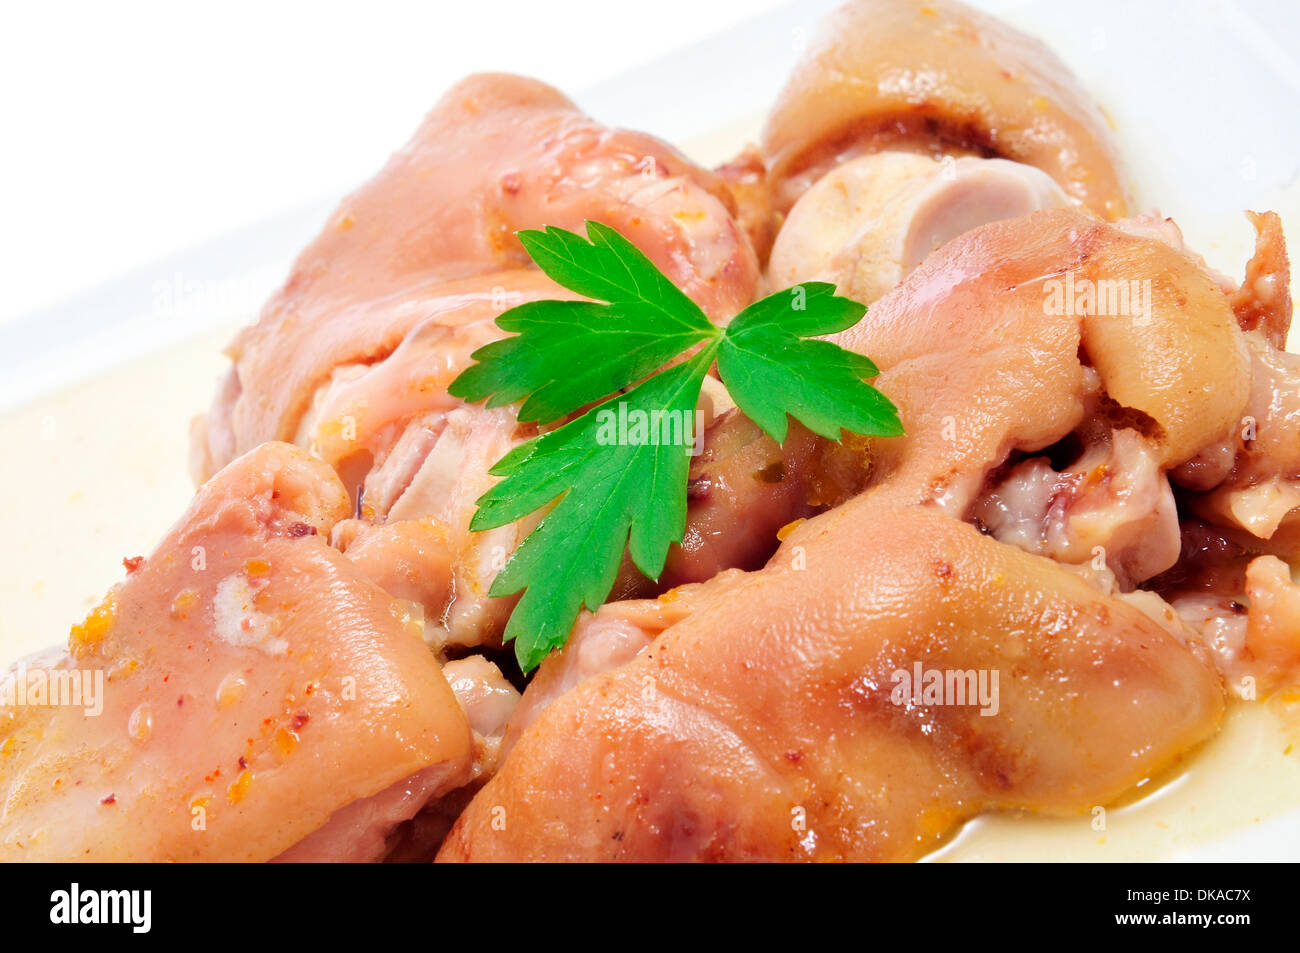 closeup of a plate with manitas de cerdo, spanish stewed pigs trotters Stock Photo